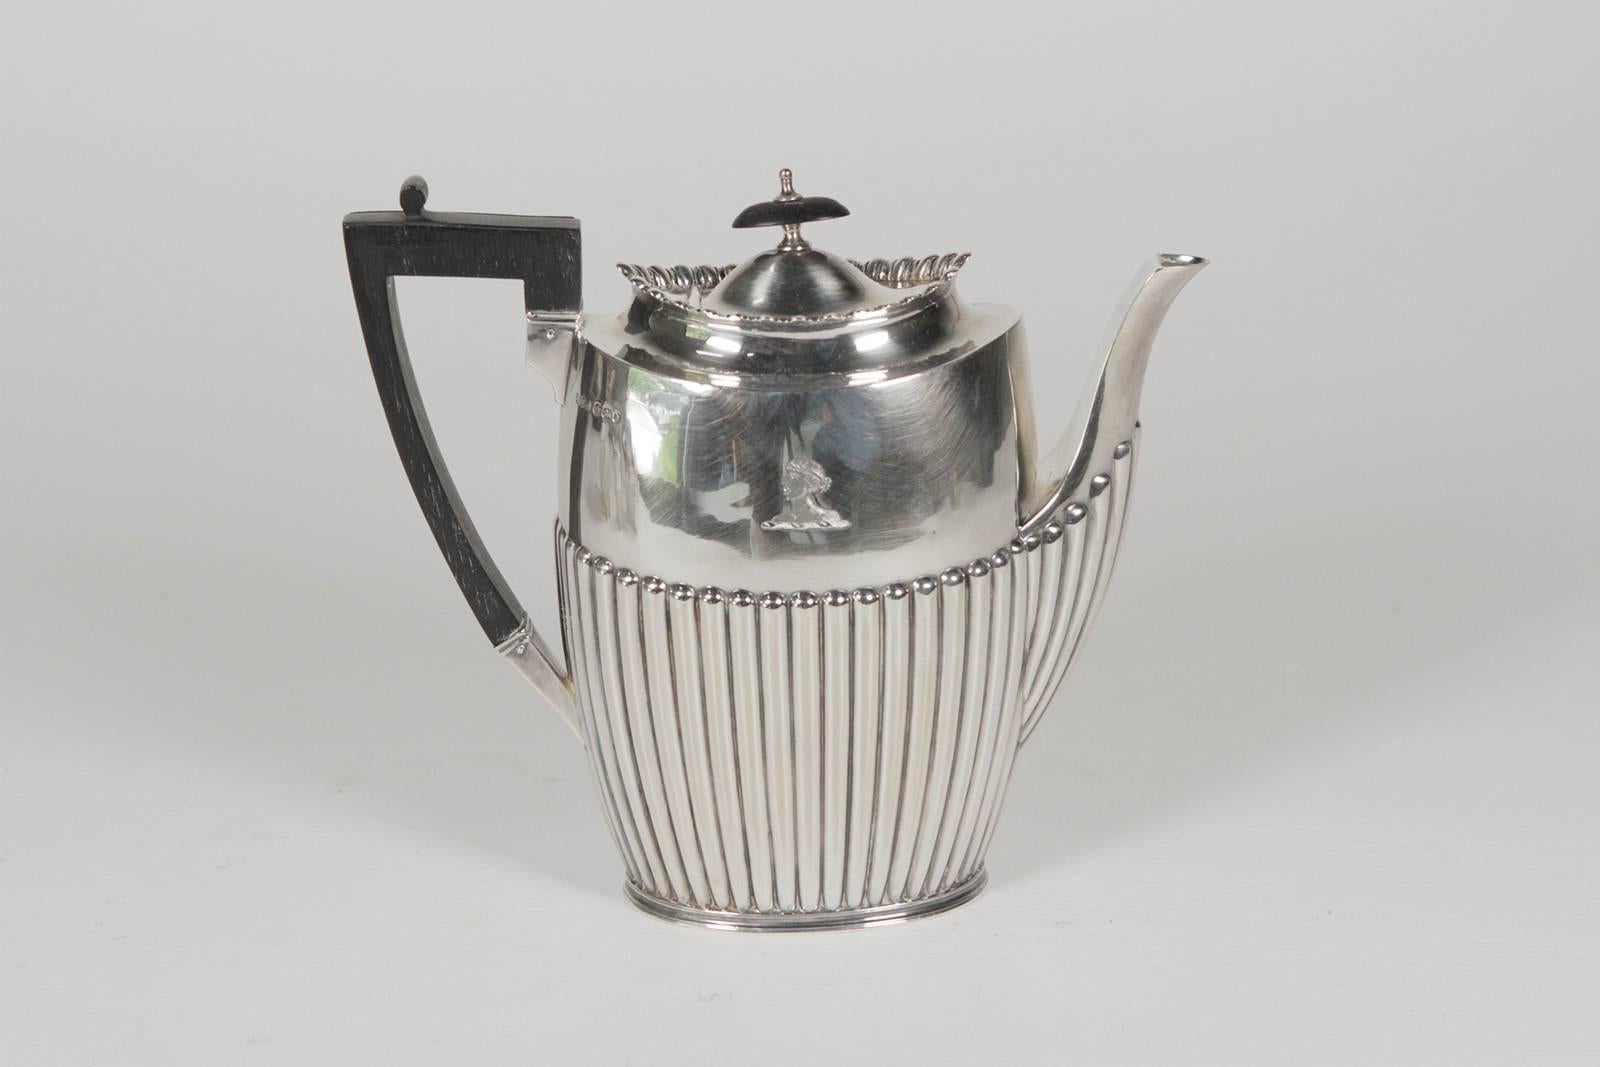 Regency style English sterling four-piece tea And coffee service, James Dixon & Sons, London year mark 1896, Each piece with ribbed design and engraved moor with ebonized handles The set is a smaller size measuring tea 9.5 H x 3.5 D x 8.5 H Coffee